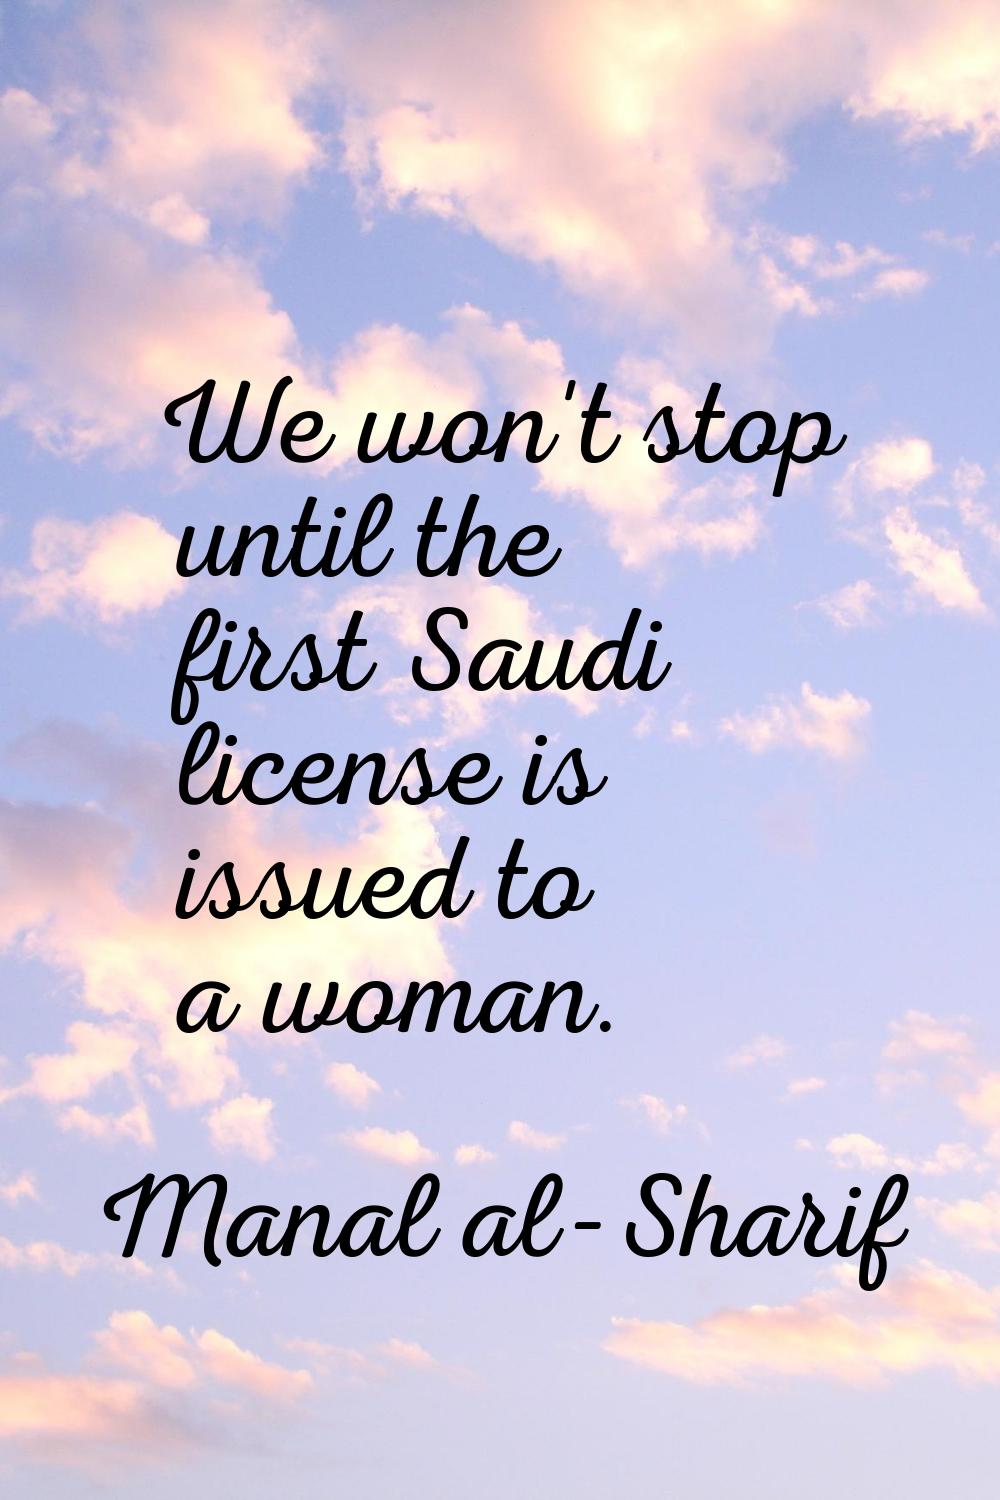 We won't stop until the first Saudi license is issued to a woman.